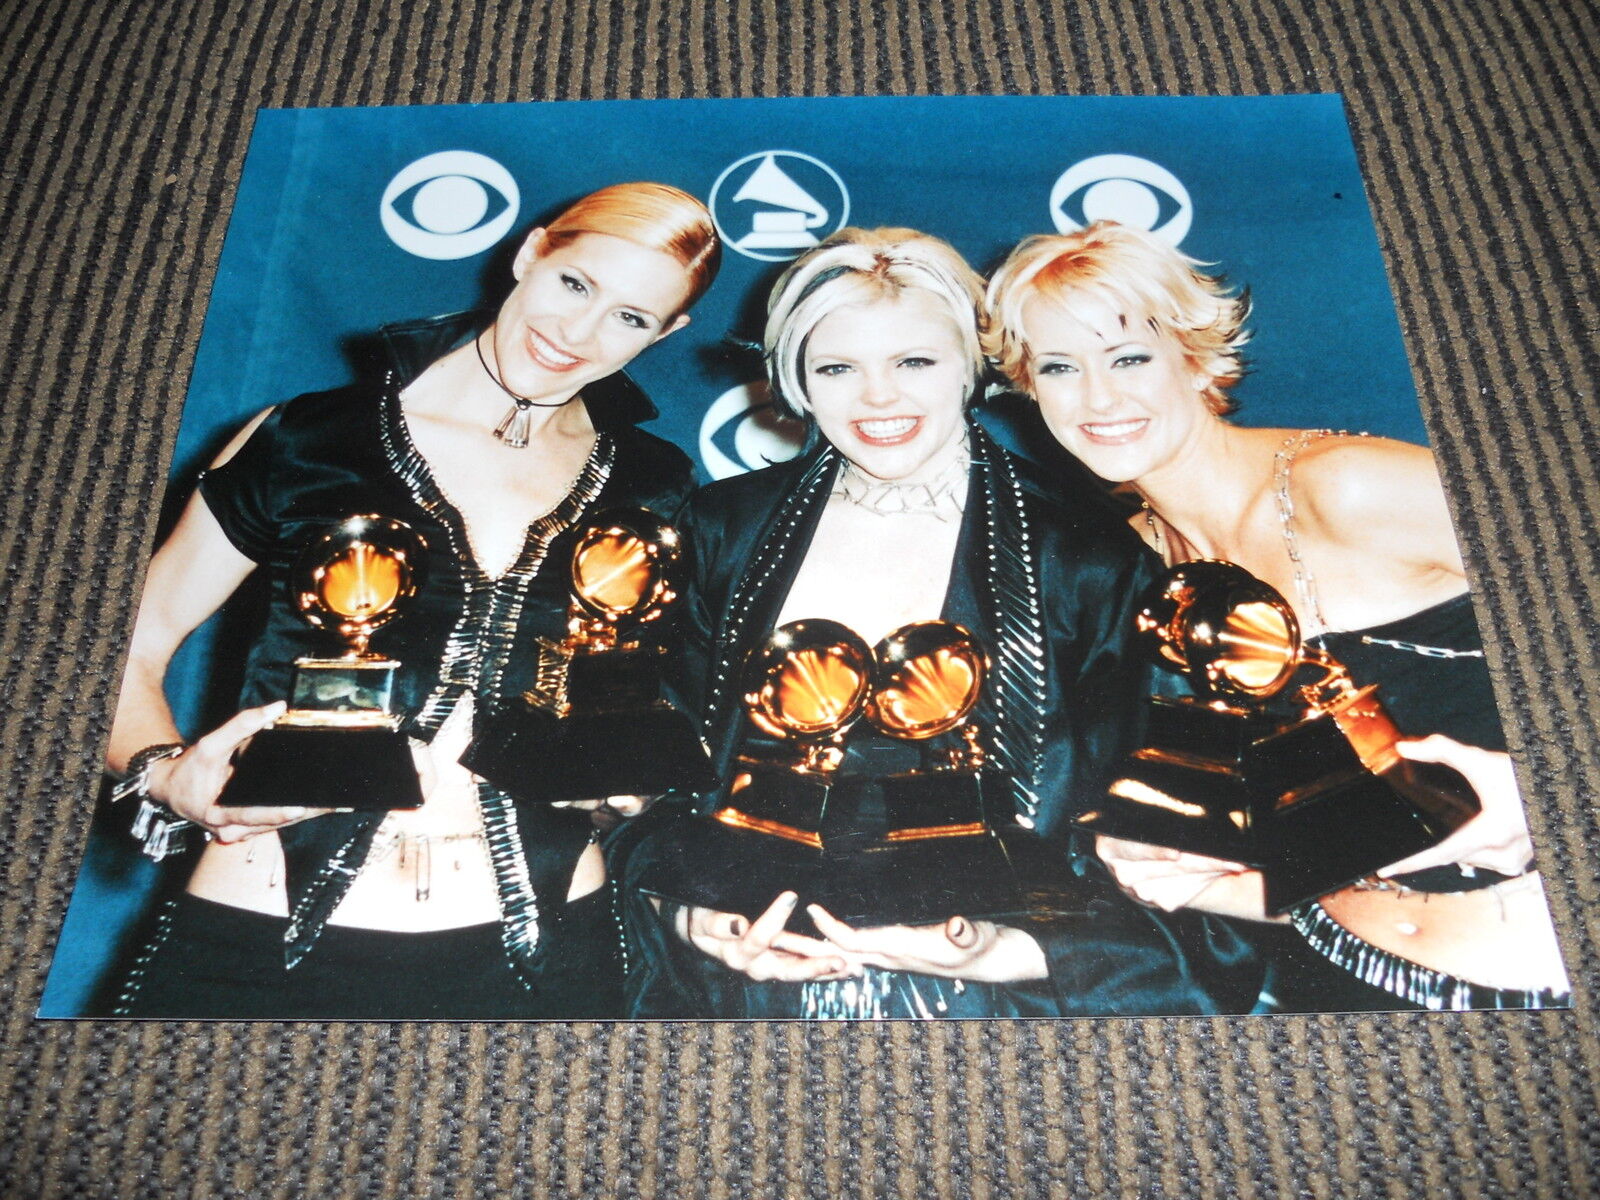 The Dixie Chicks Sexy Country Music 8x10 Promo Photo Poster painting #1